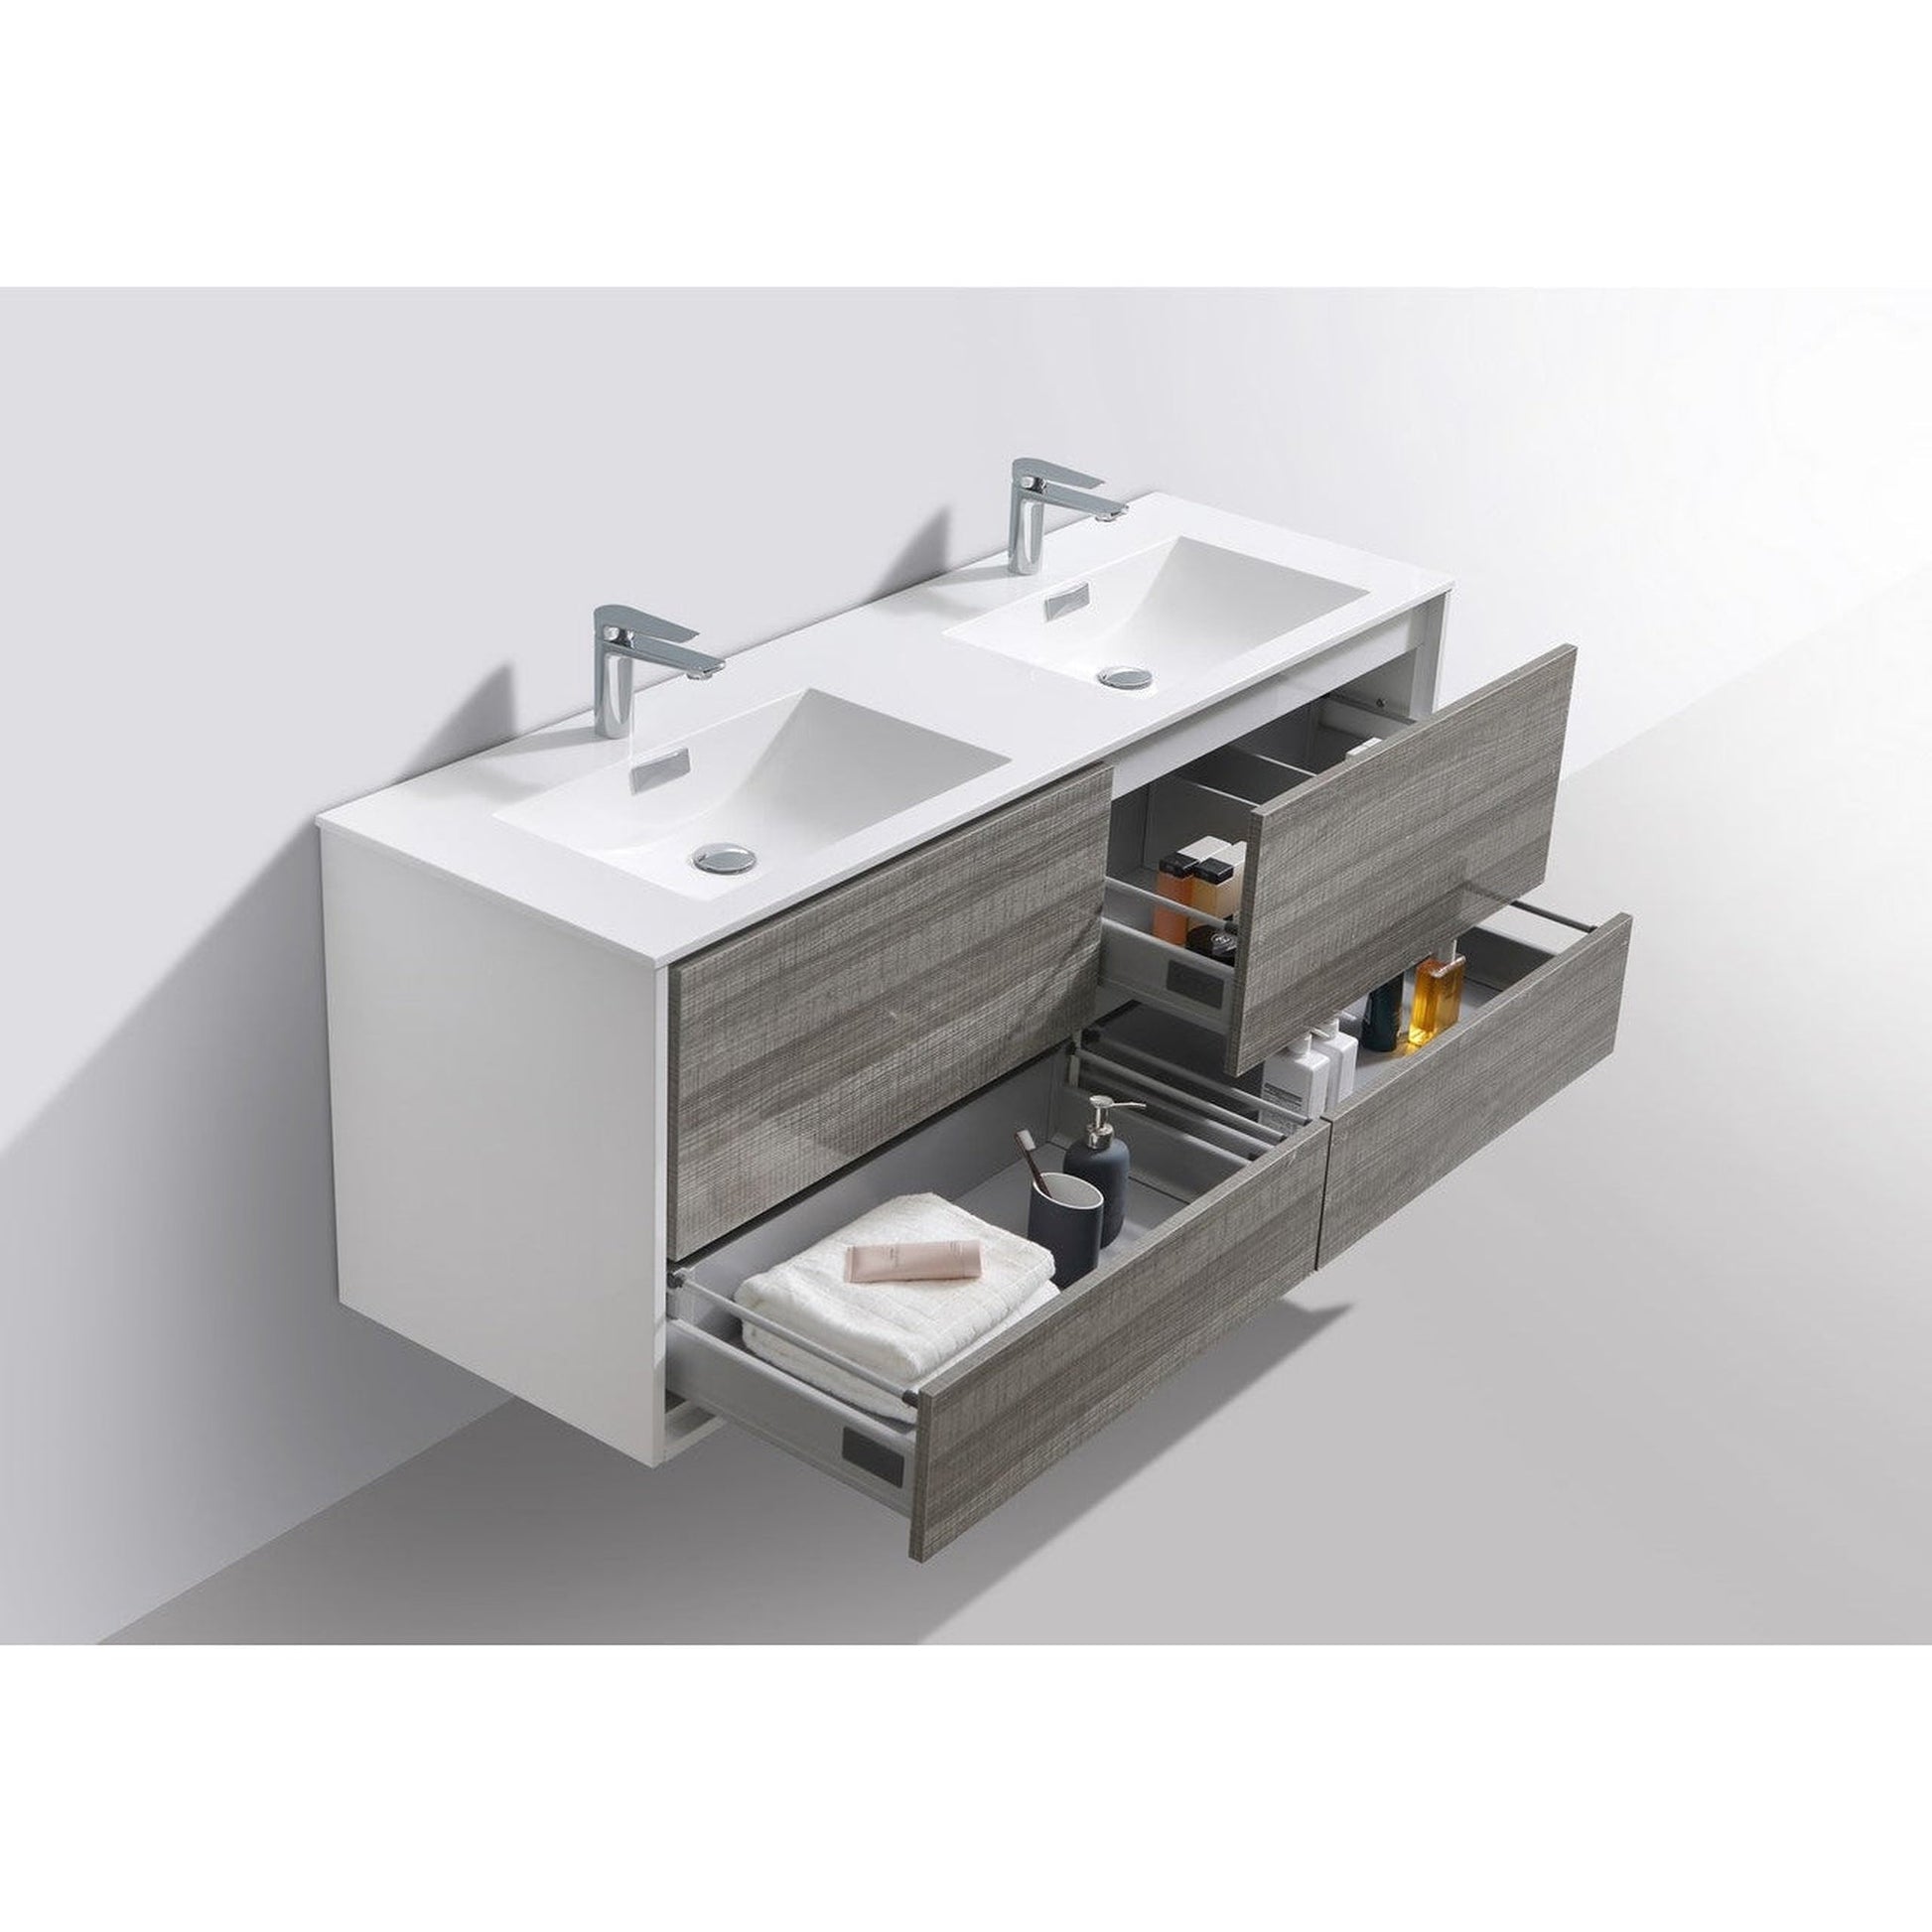 KubeBath DeLusso 60" Ash Gray Wall-Mounted Modern Bathroom Vanity With Double Integrated Acrylic Sink With Overflow and 60" White Framed Mirror With Shelf